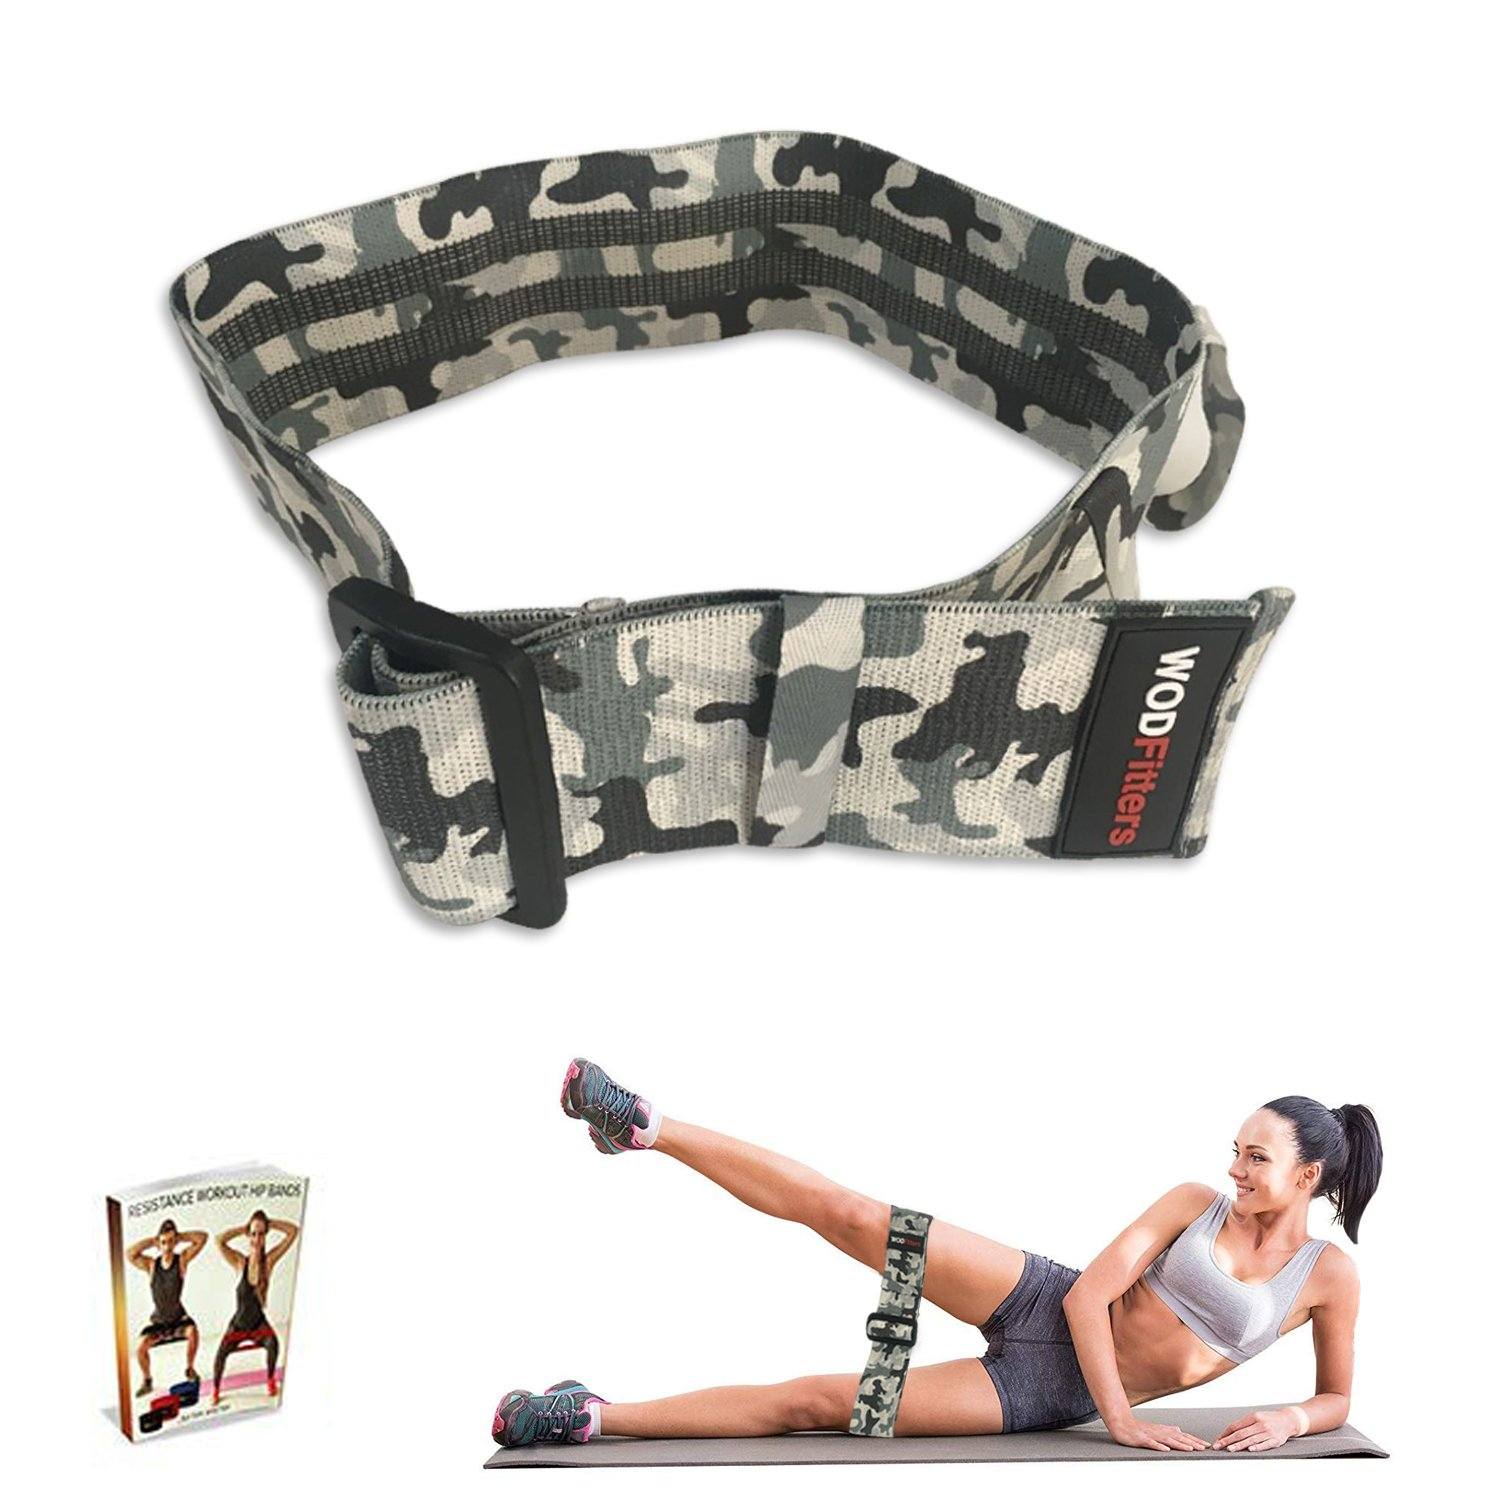 Adjustable Tactical Hip Band - Choose Camo or Black - One Band to Replace 3 Bands - Adjustable From 13” up to 17” 